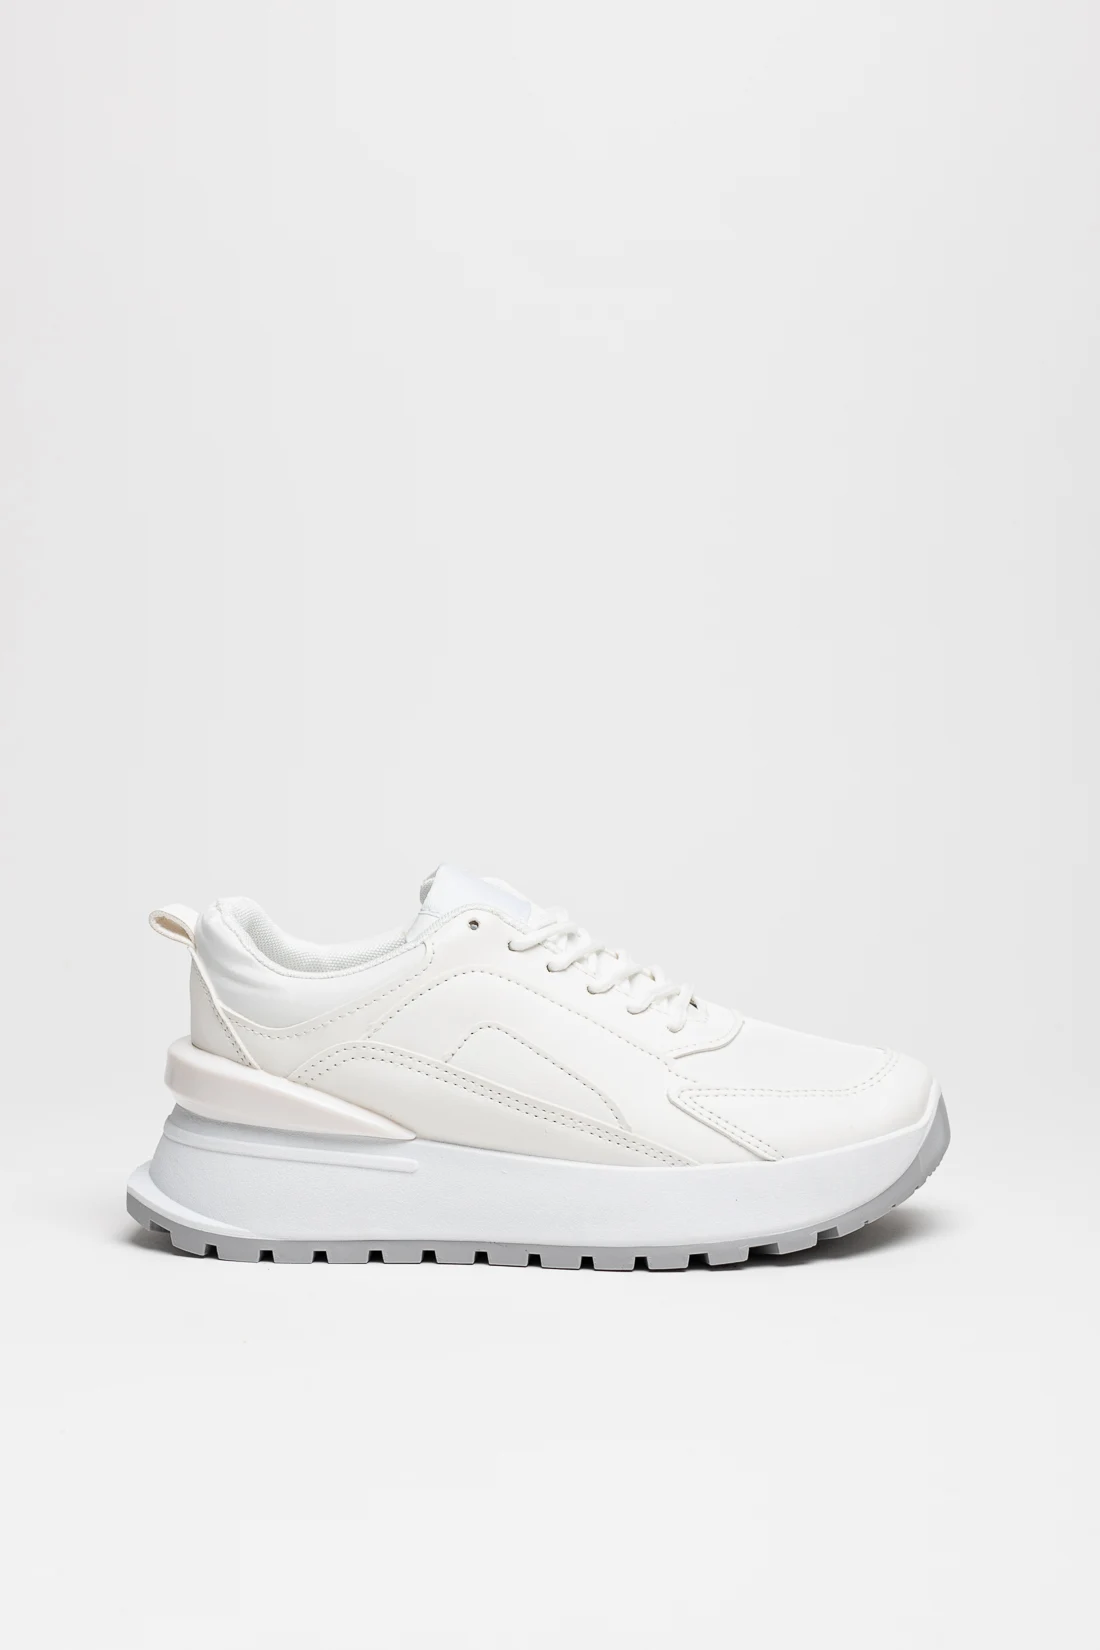 CADRE SNEAKERS - WHITE